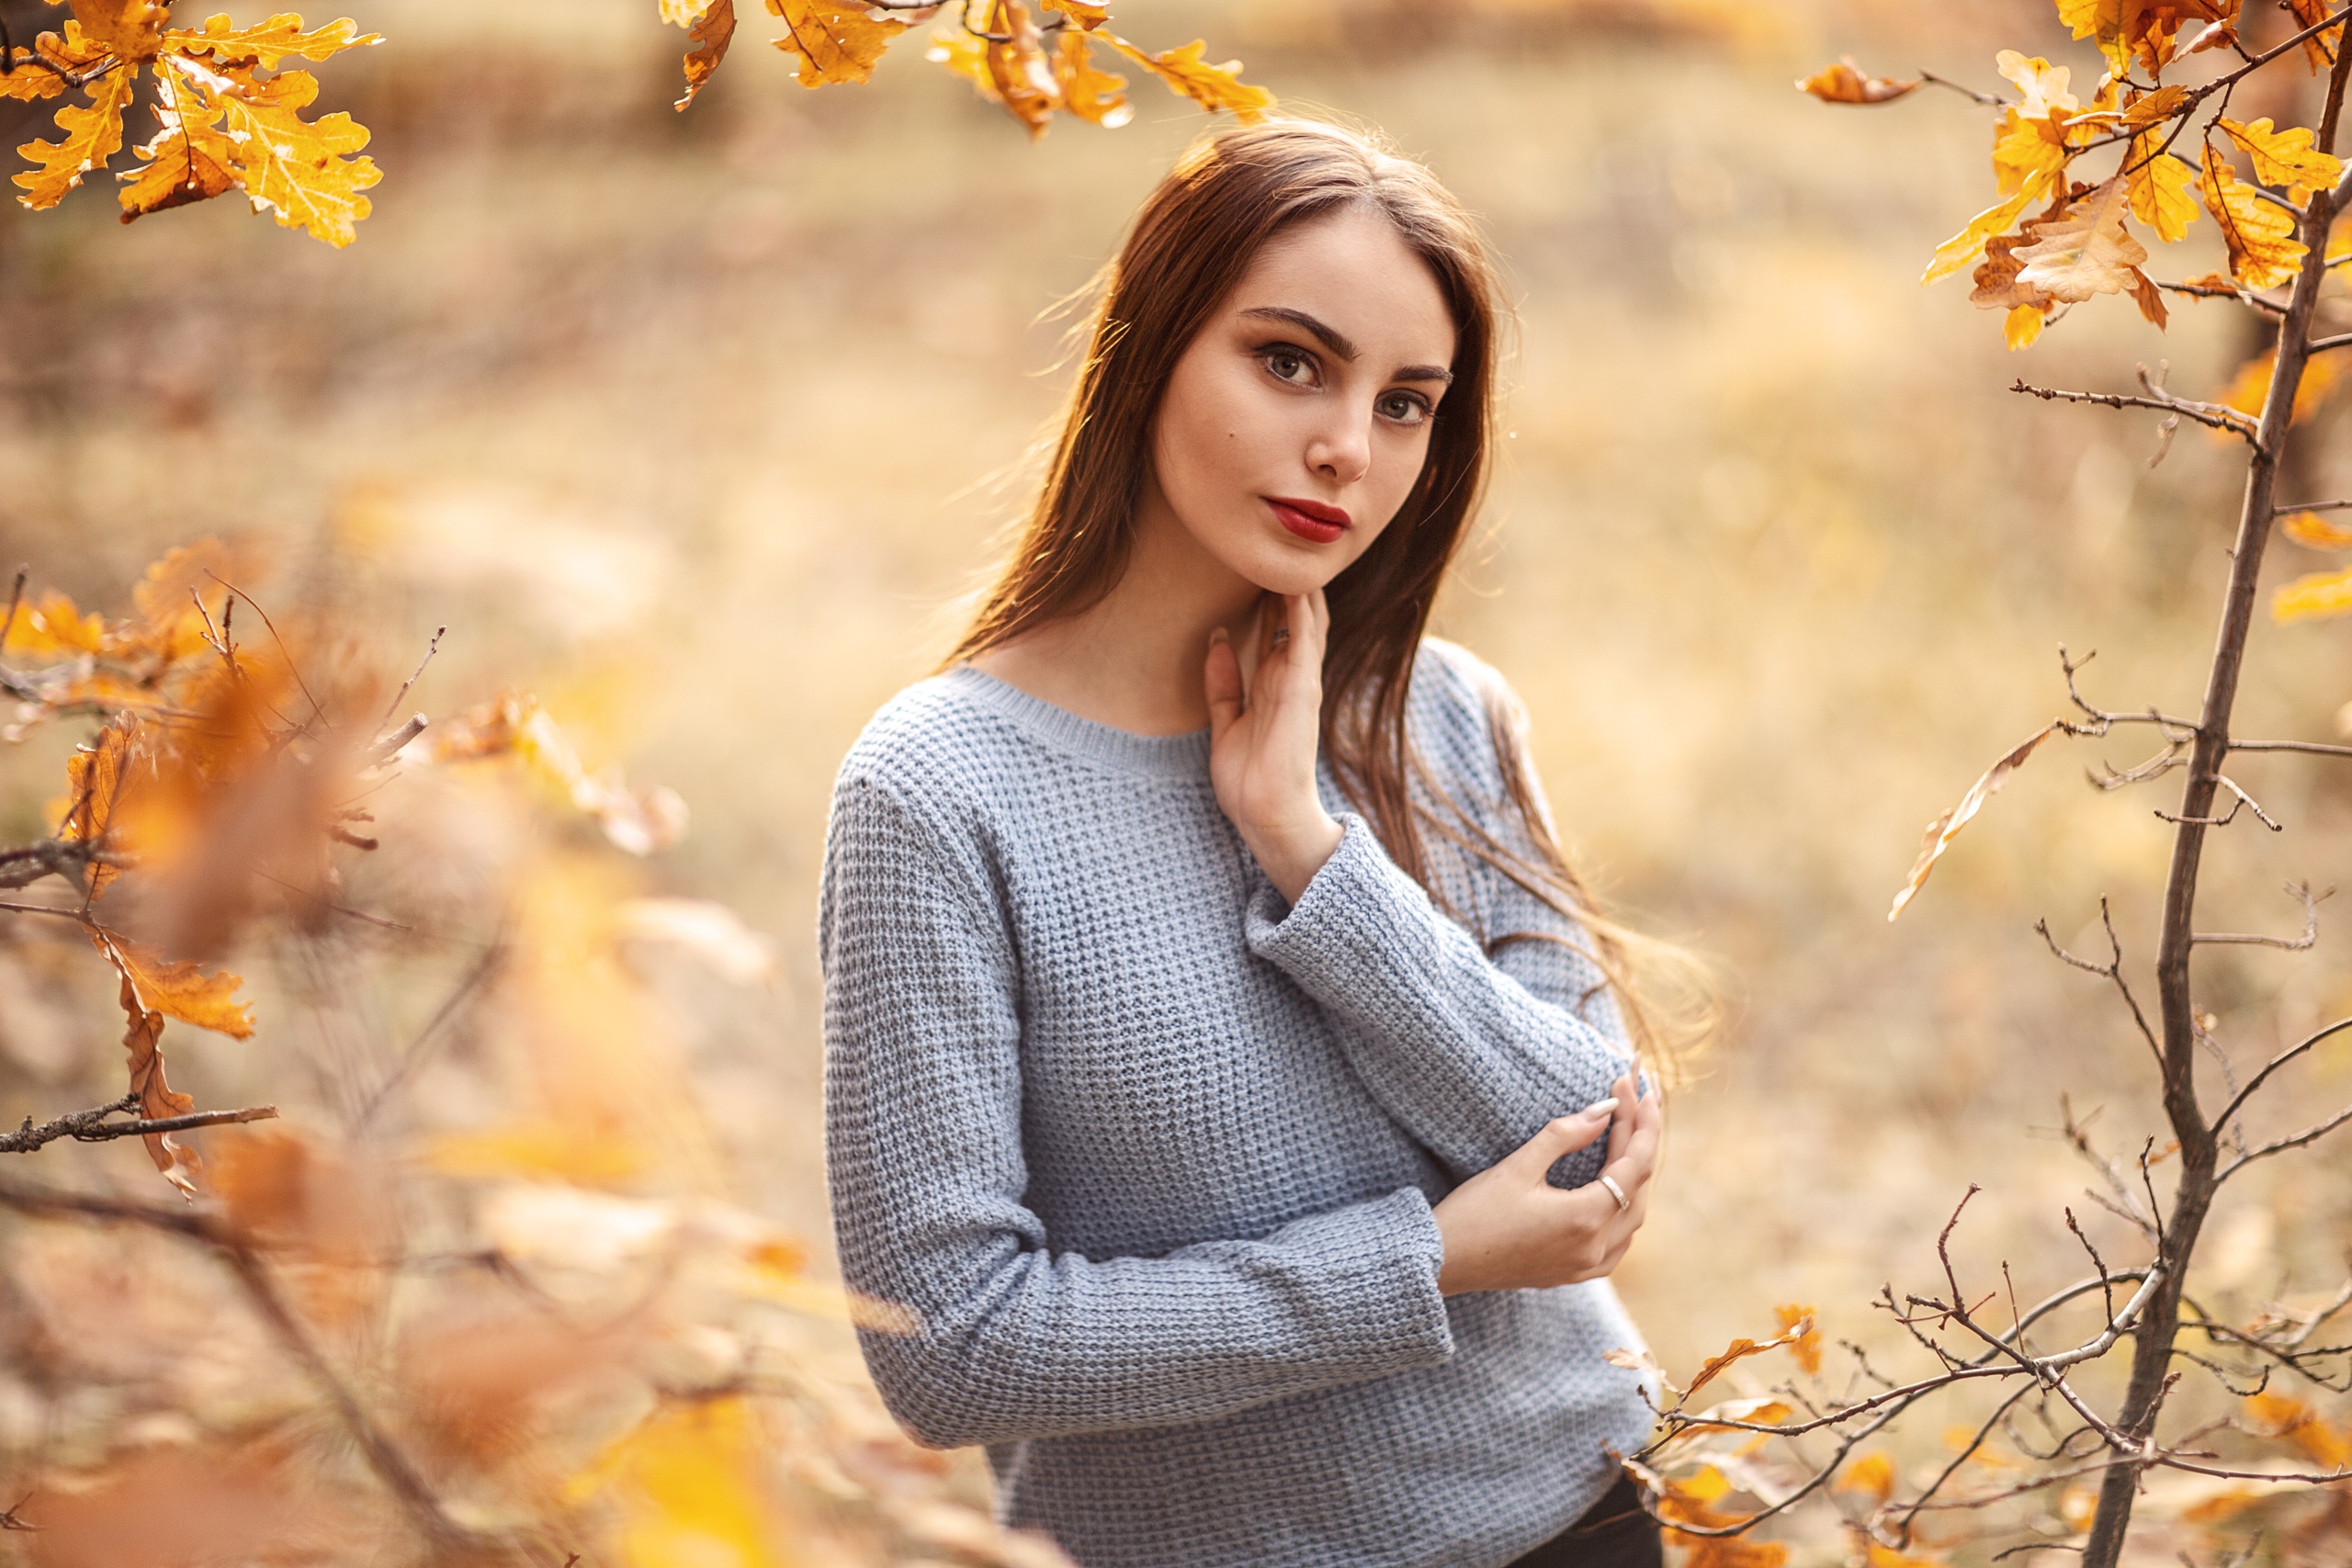 Women Model Brunette Long Hair Portrait Outdoors Fall Leaves Forest Looking At Viewer Red Lipstick S 2560x1707